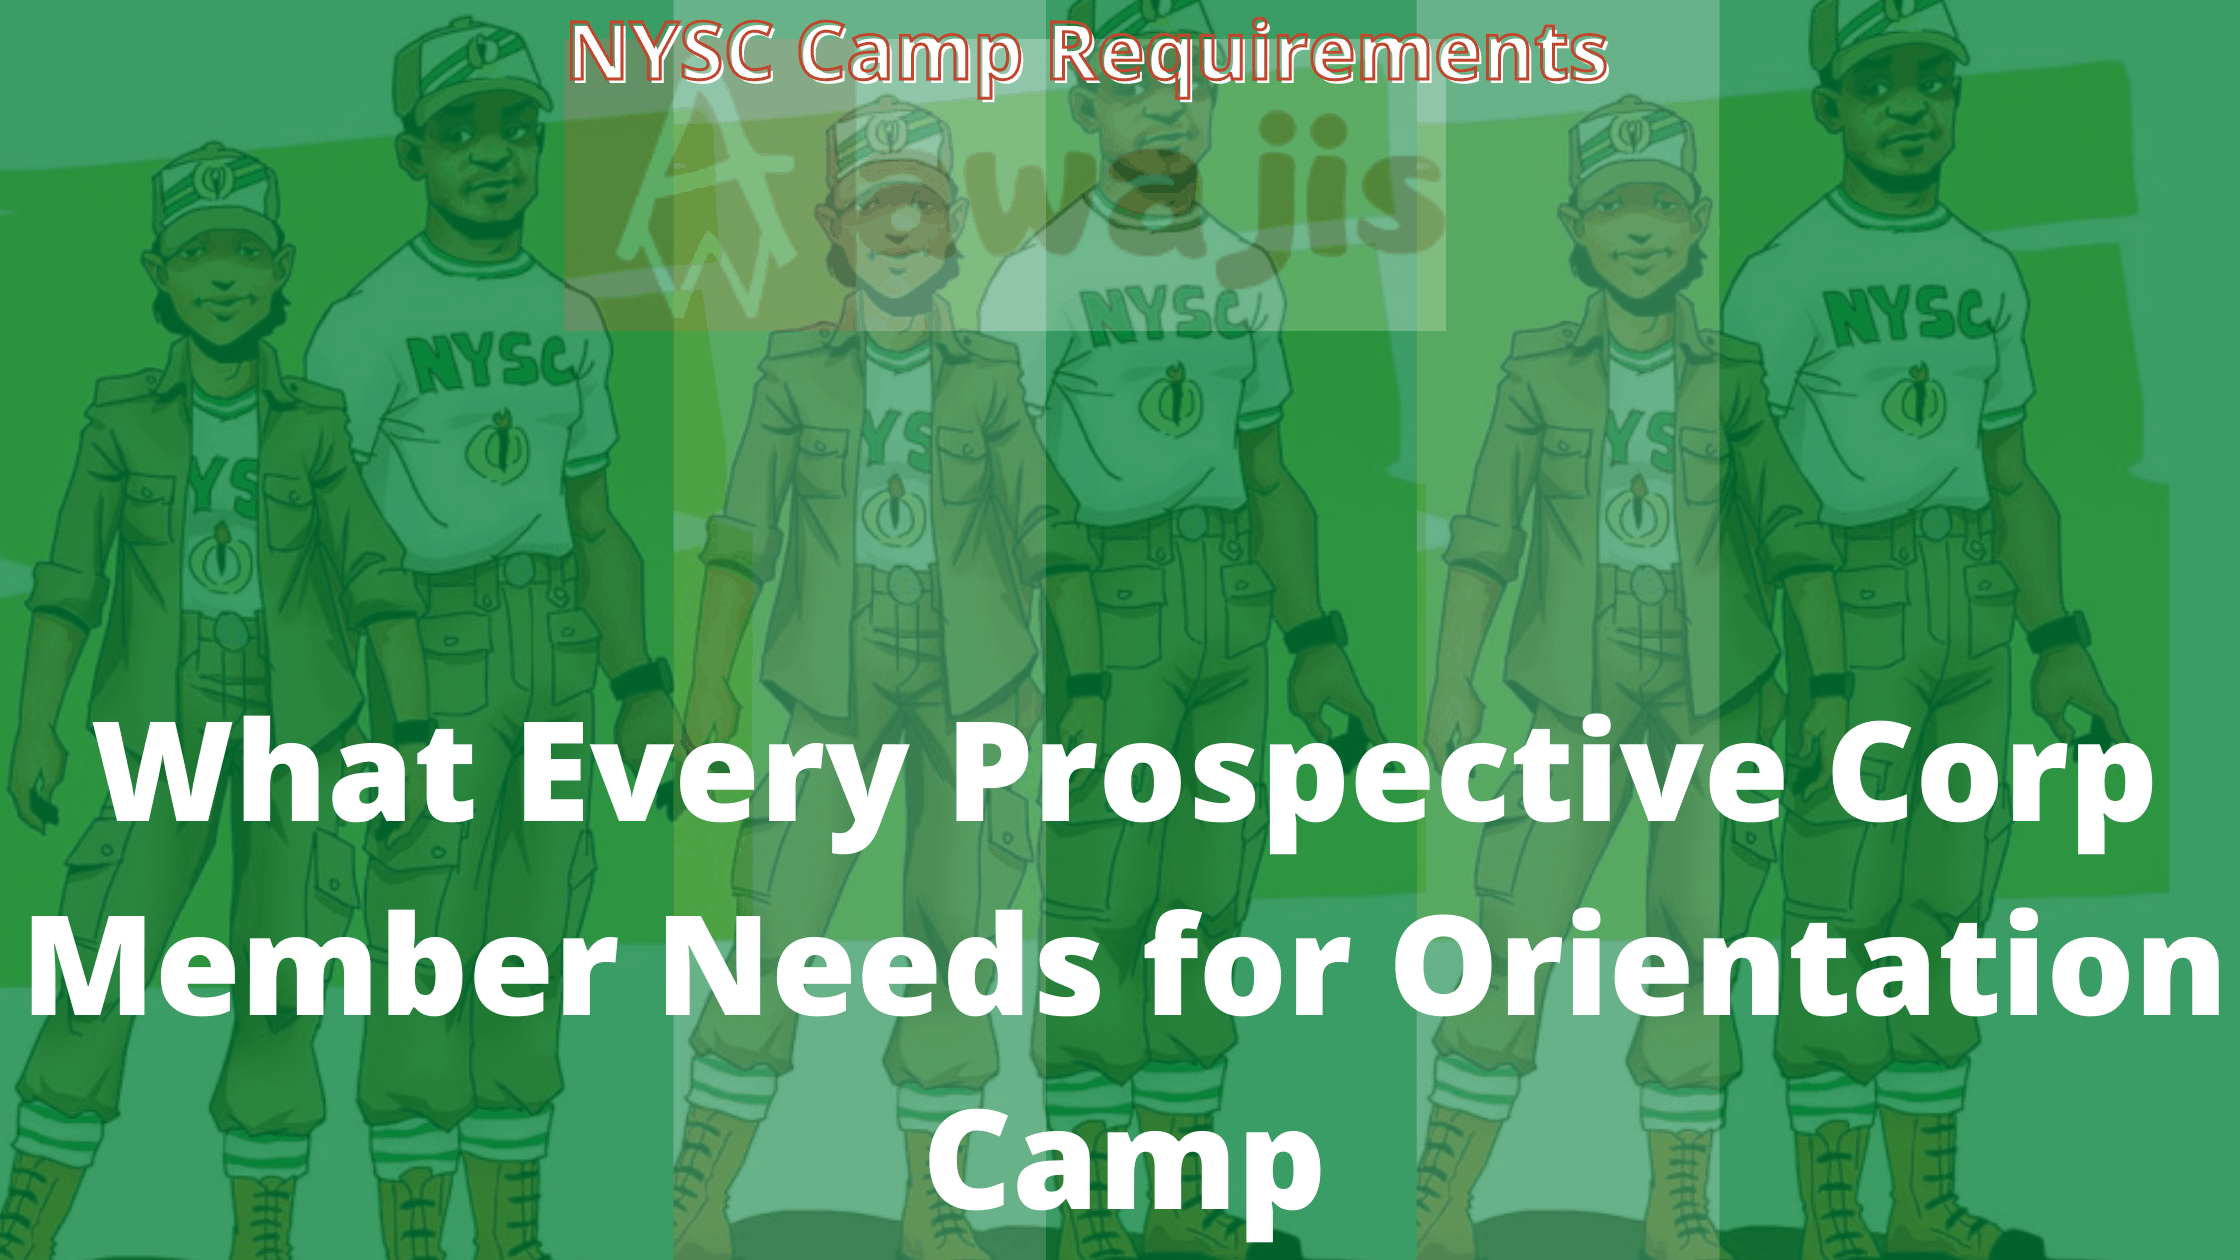 What Every Prospective Corp Member Needs for Orientation Camp